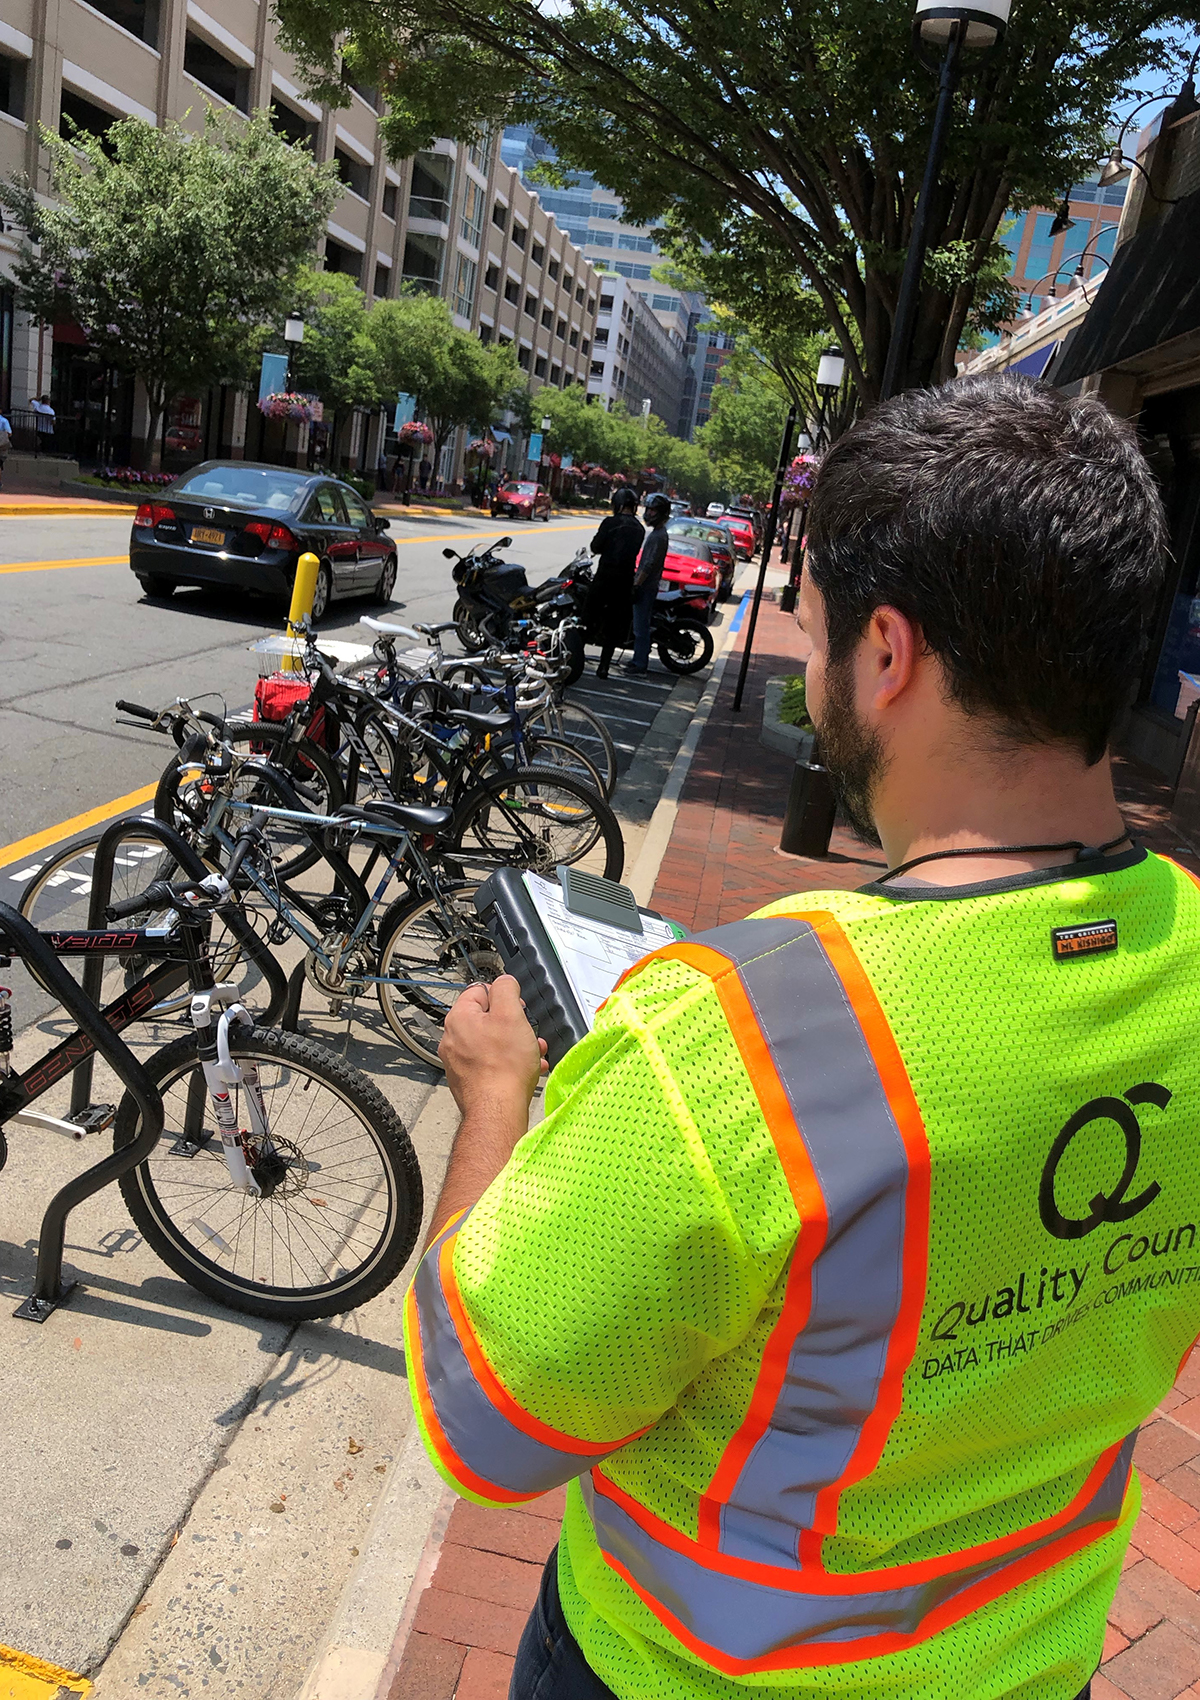 Qualiy Counts performs curbside data collection